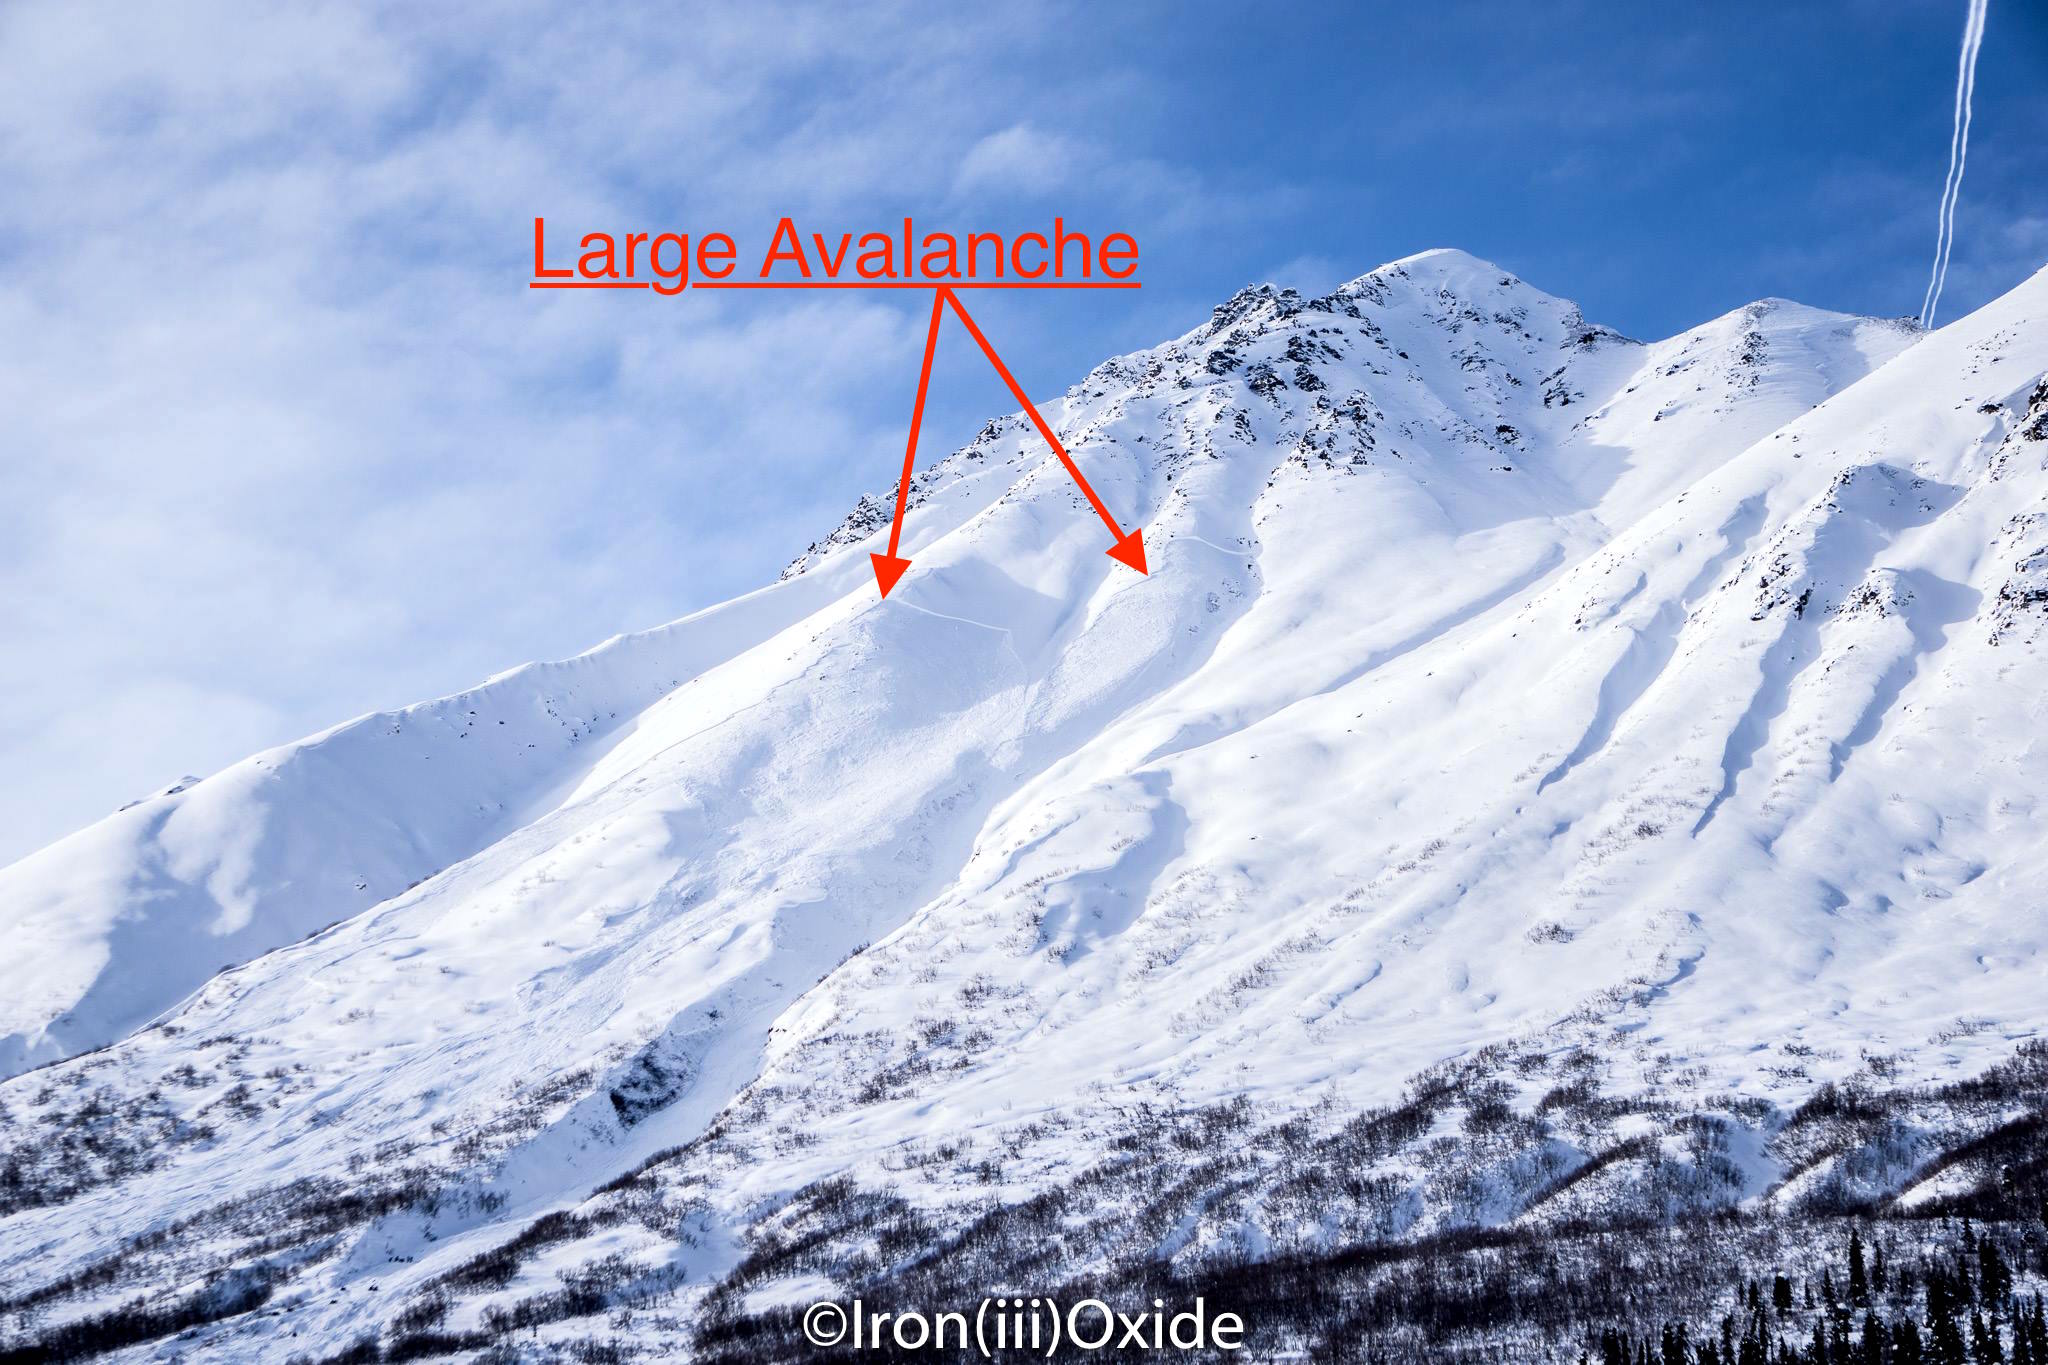 "Fatal avalanche in Eureka area on Saturday, Feb.27th 2016. Probe line can be seen in lower lefthand corner." - CNFAIC